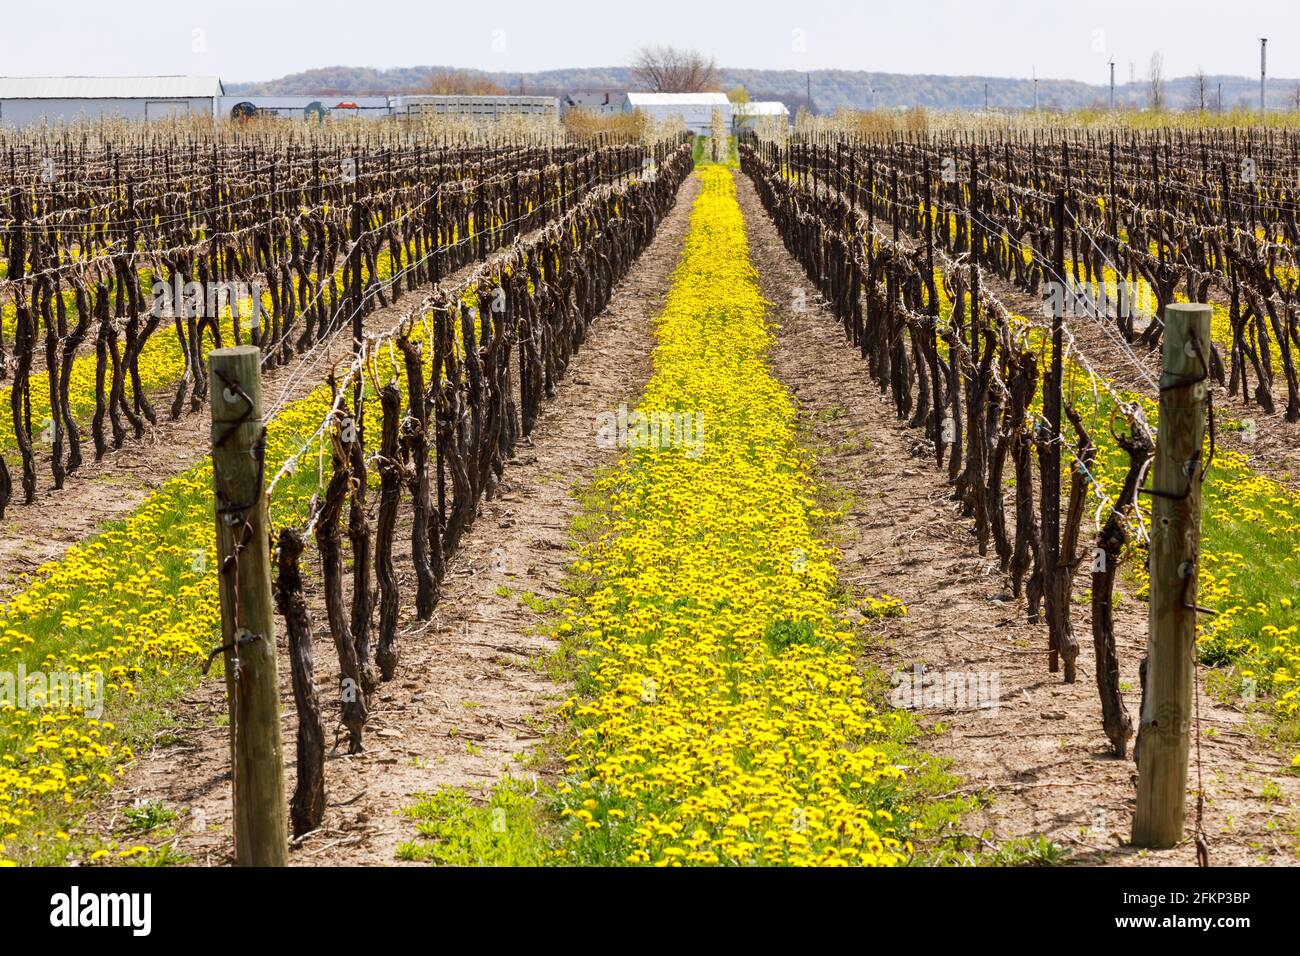 Canada, Ontario, Niagara on the Lake, grape vines in early spring with dandelions growing between the vineyard rows Stock Photo